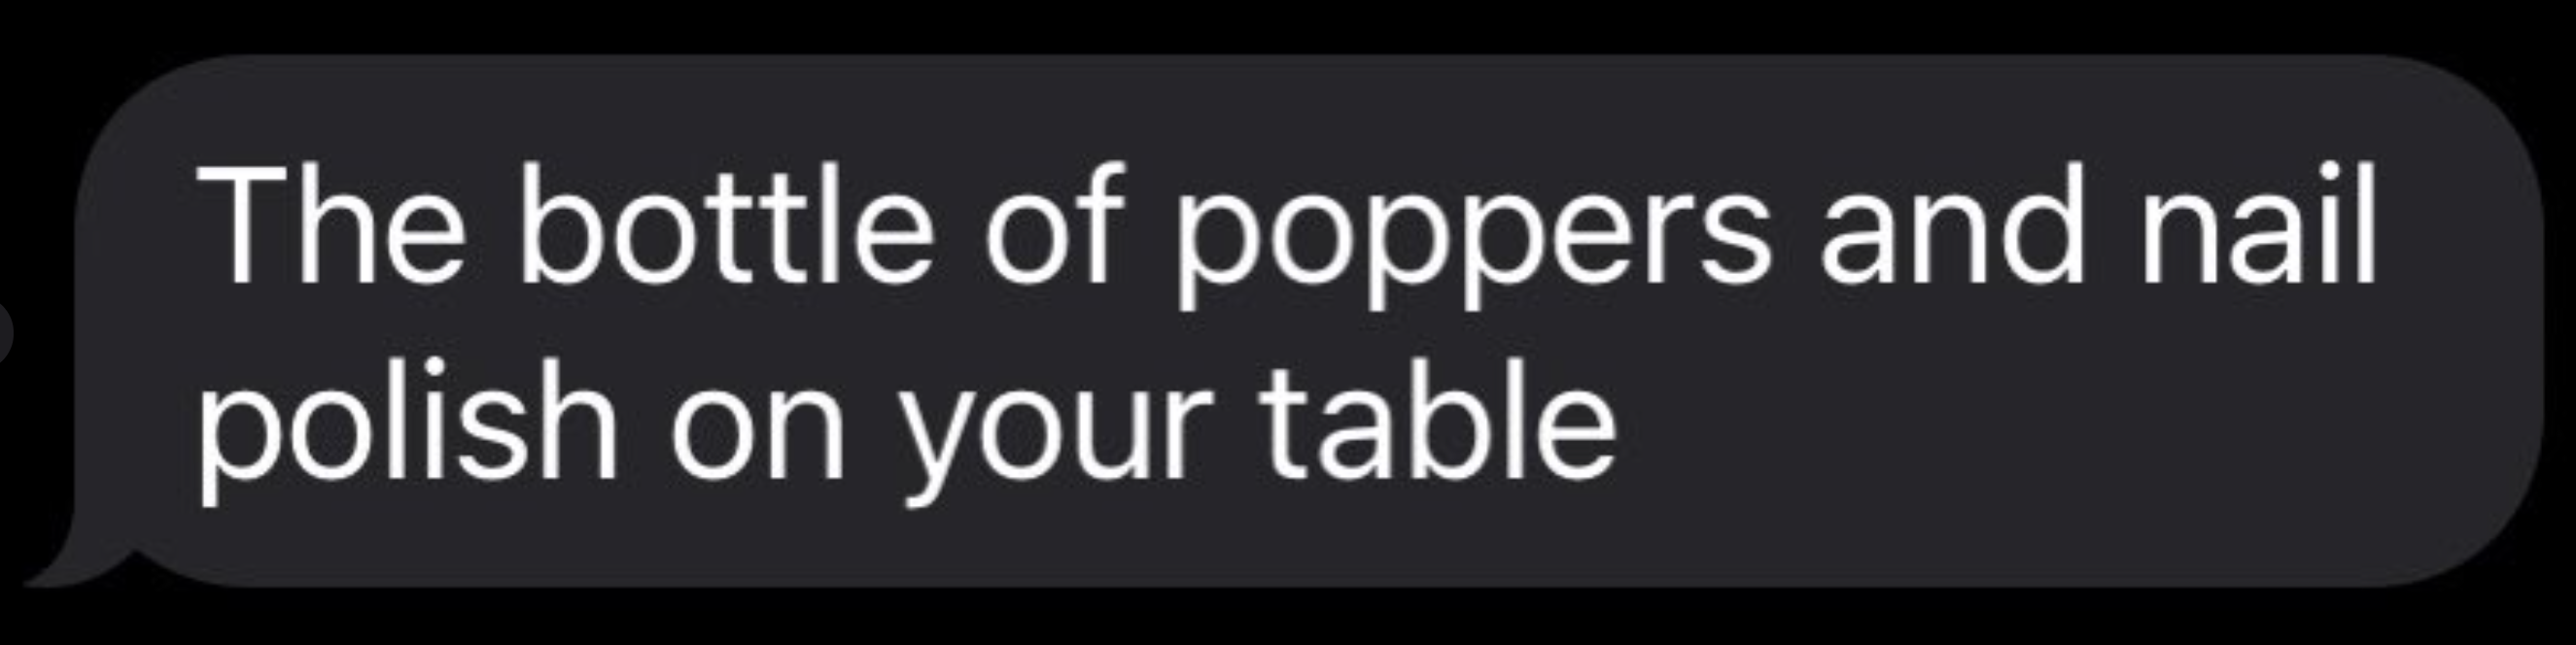 &quot;The bottles of poppers and nail polish on your table&quot;